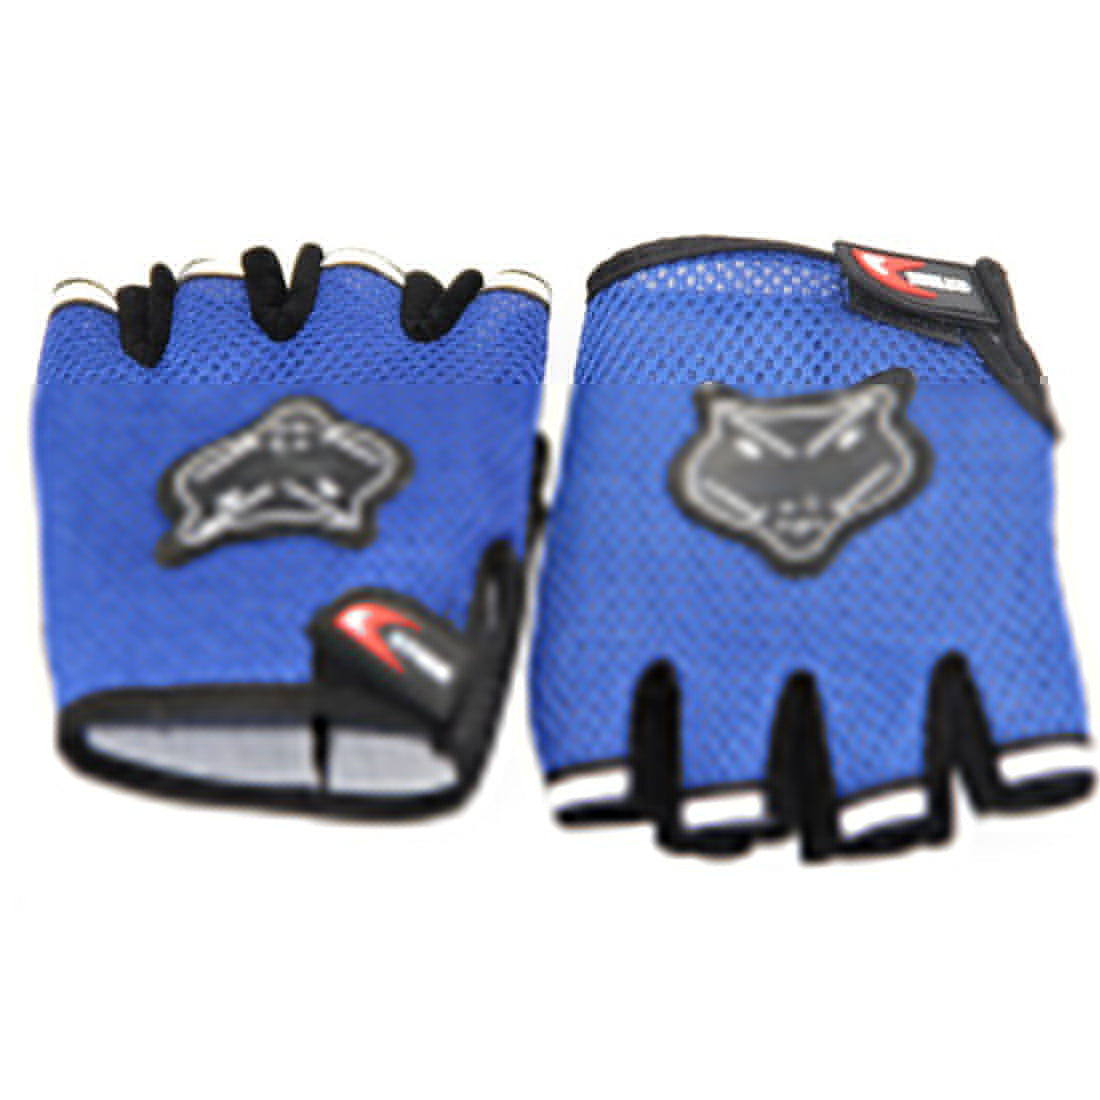 Gym Sports Fitness Exercise Anti-Slip Weightlifting Half-Finger Gloves